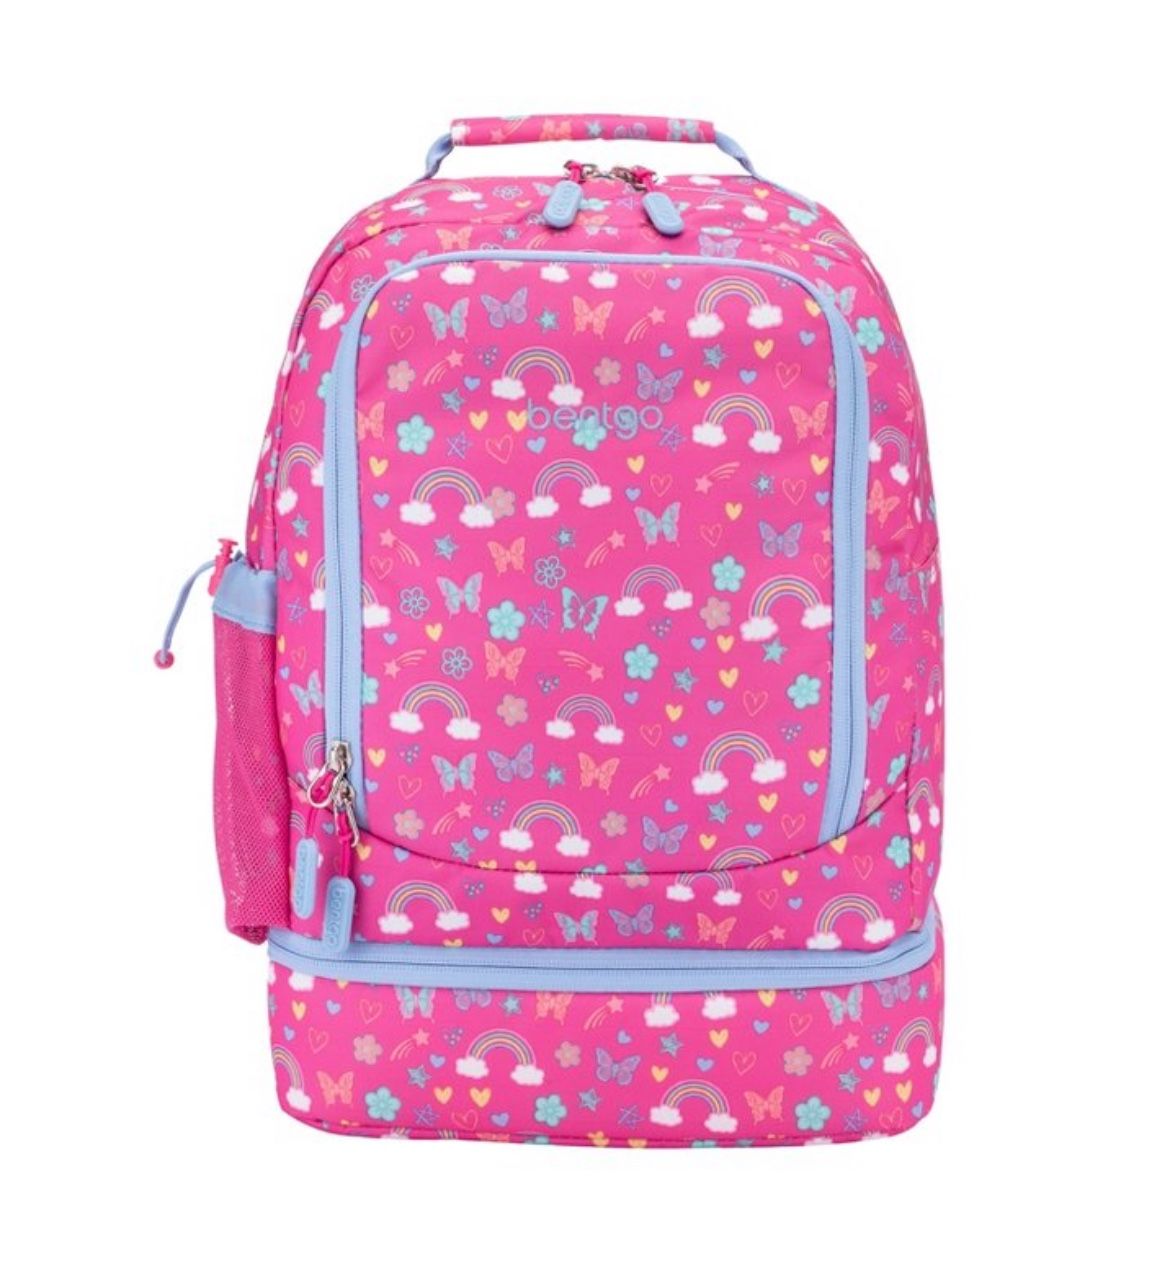 Bentgo Kids 2-in-1 Backpack & Insulated Lunch Bag Combo- Pink Rainbows~ NEW